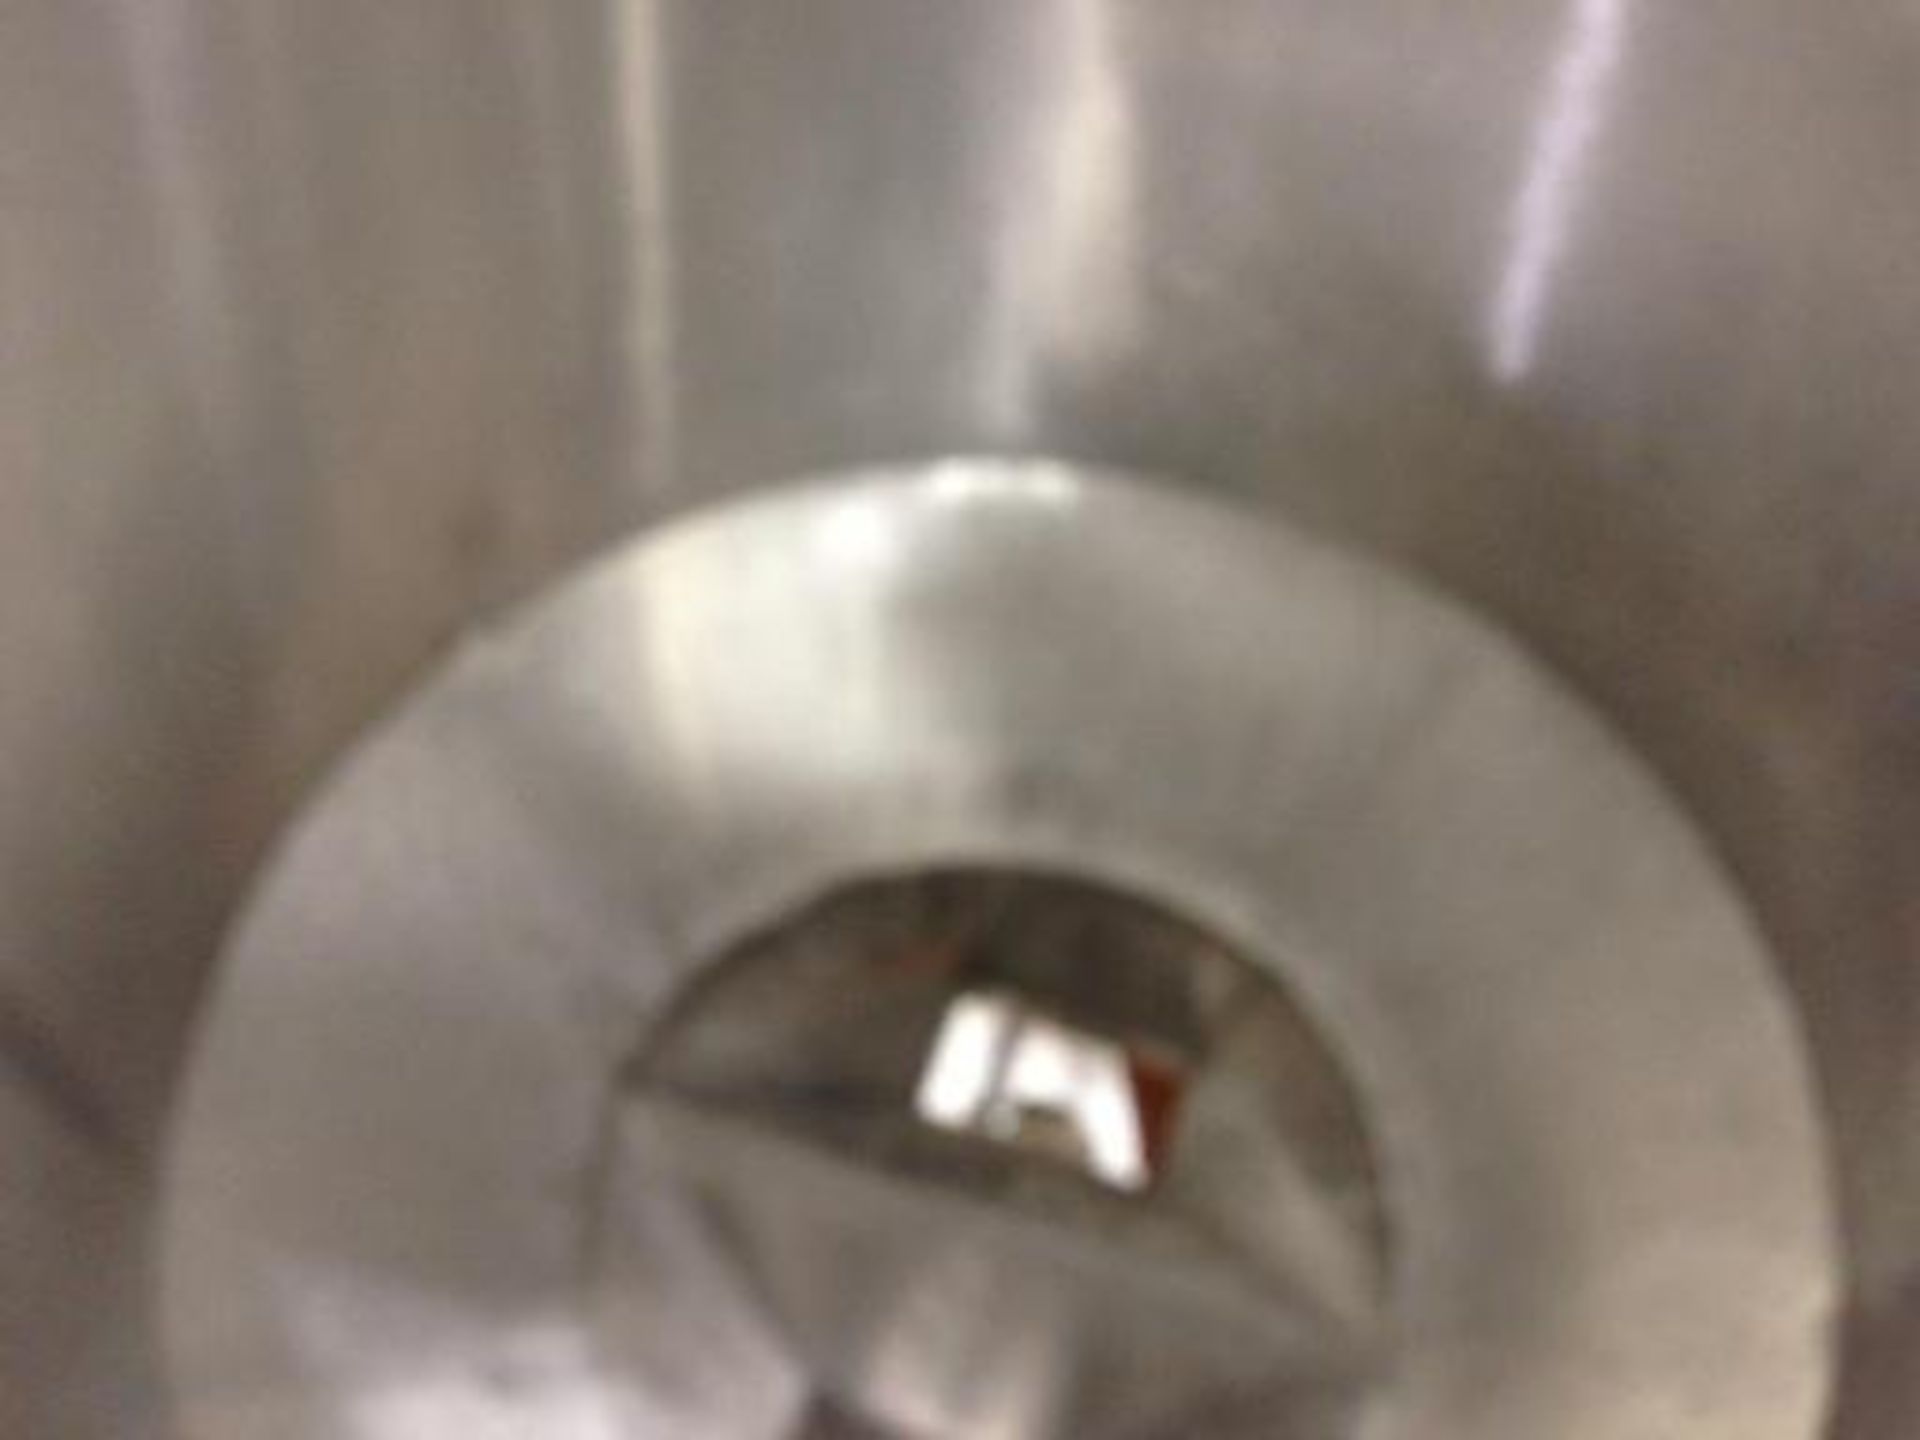 East Fill Kettle, Stainless Steel Kettle, 33 inch dia x 36 straight side, direct drive agitator, - Image 7 of 9